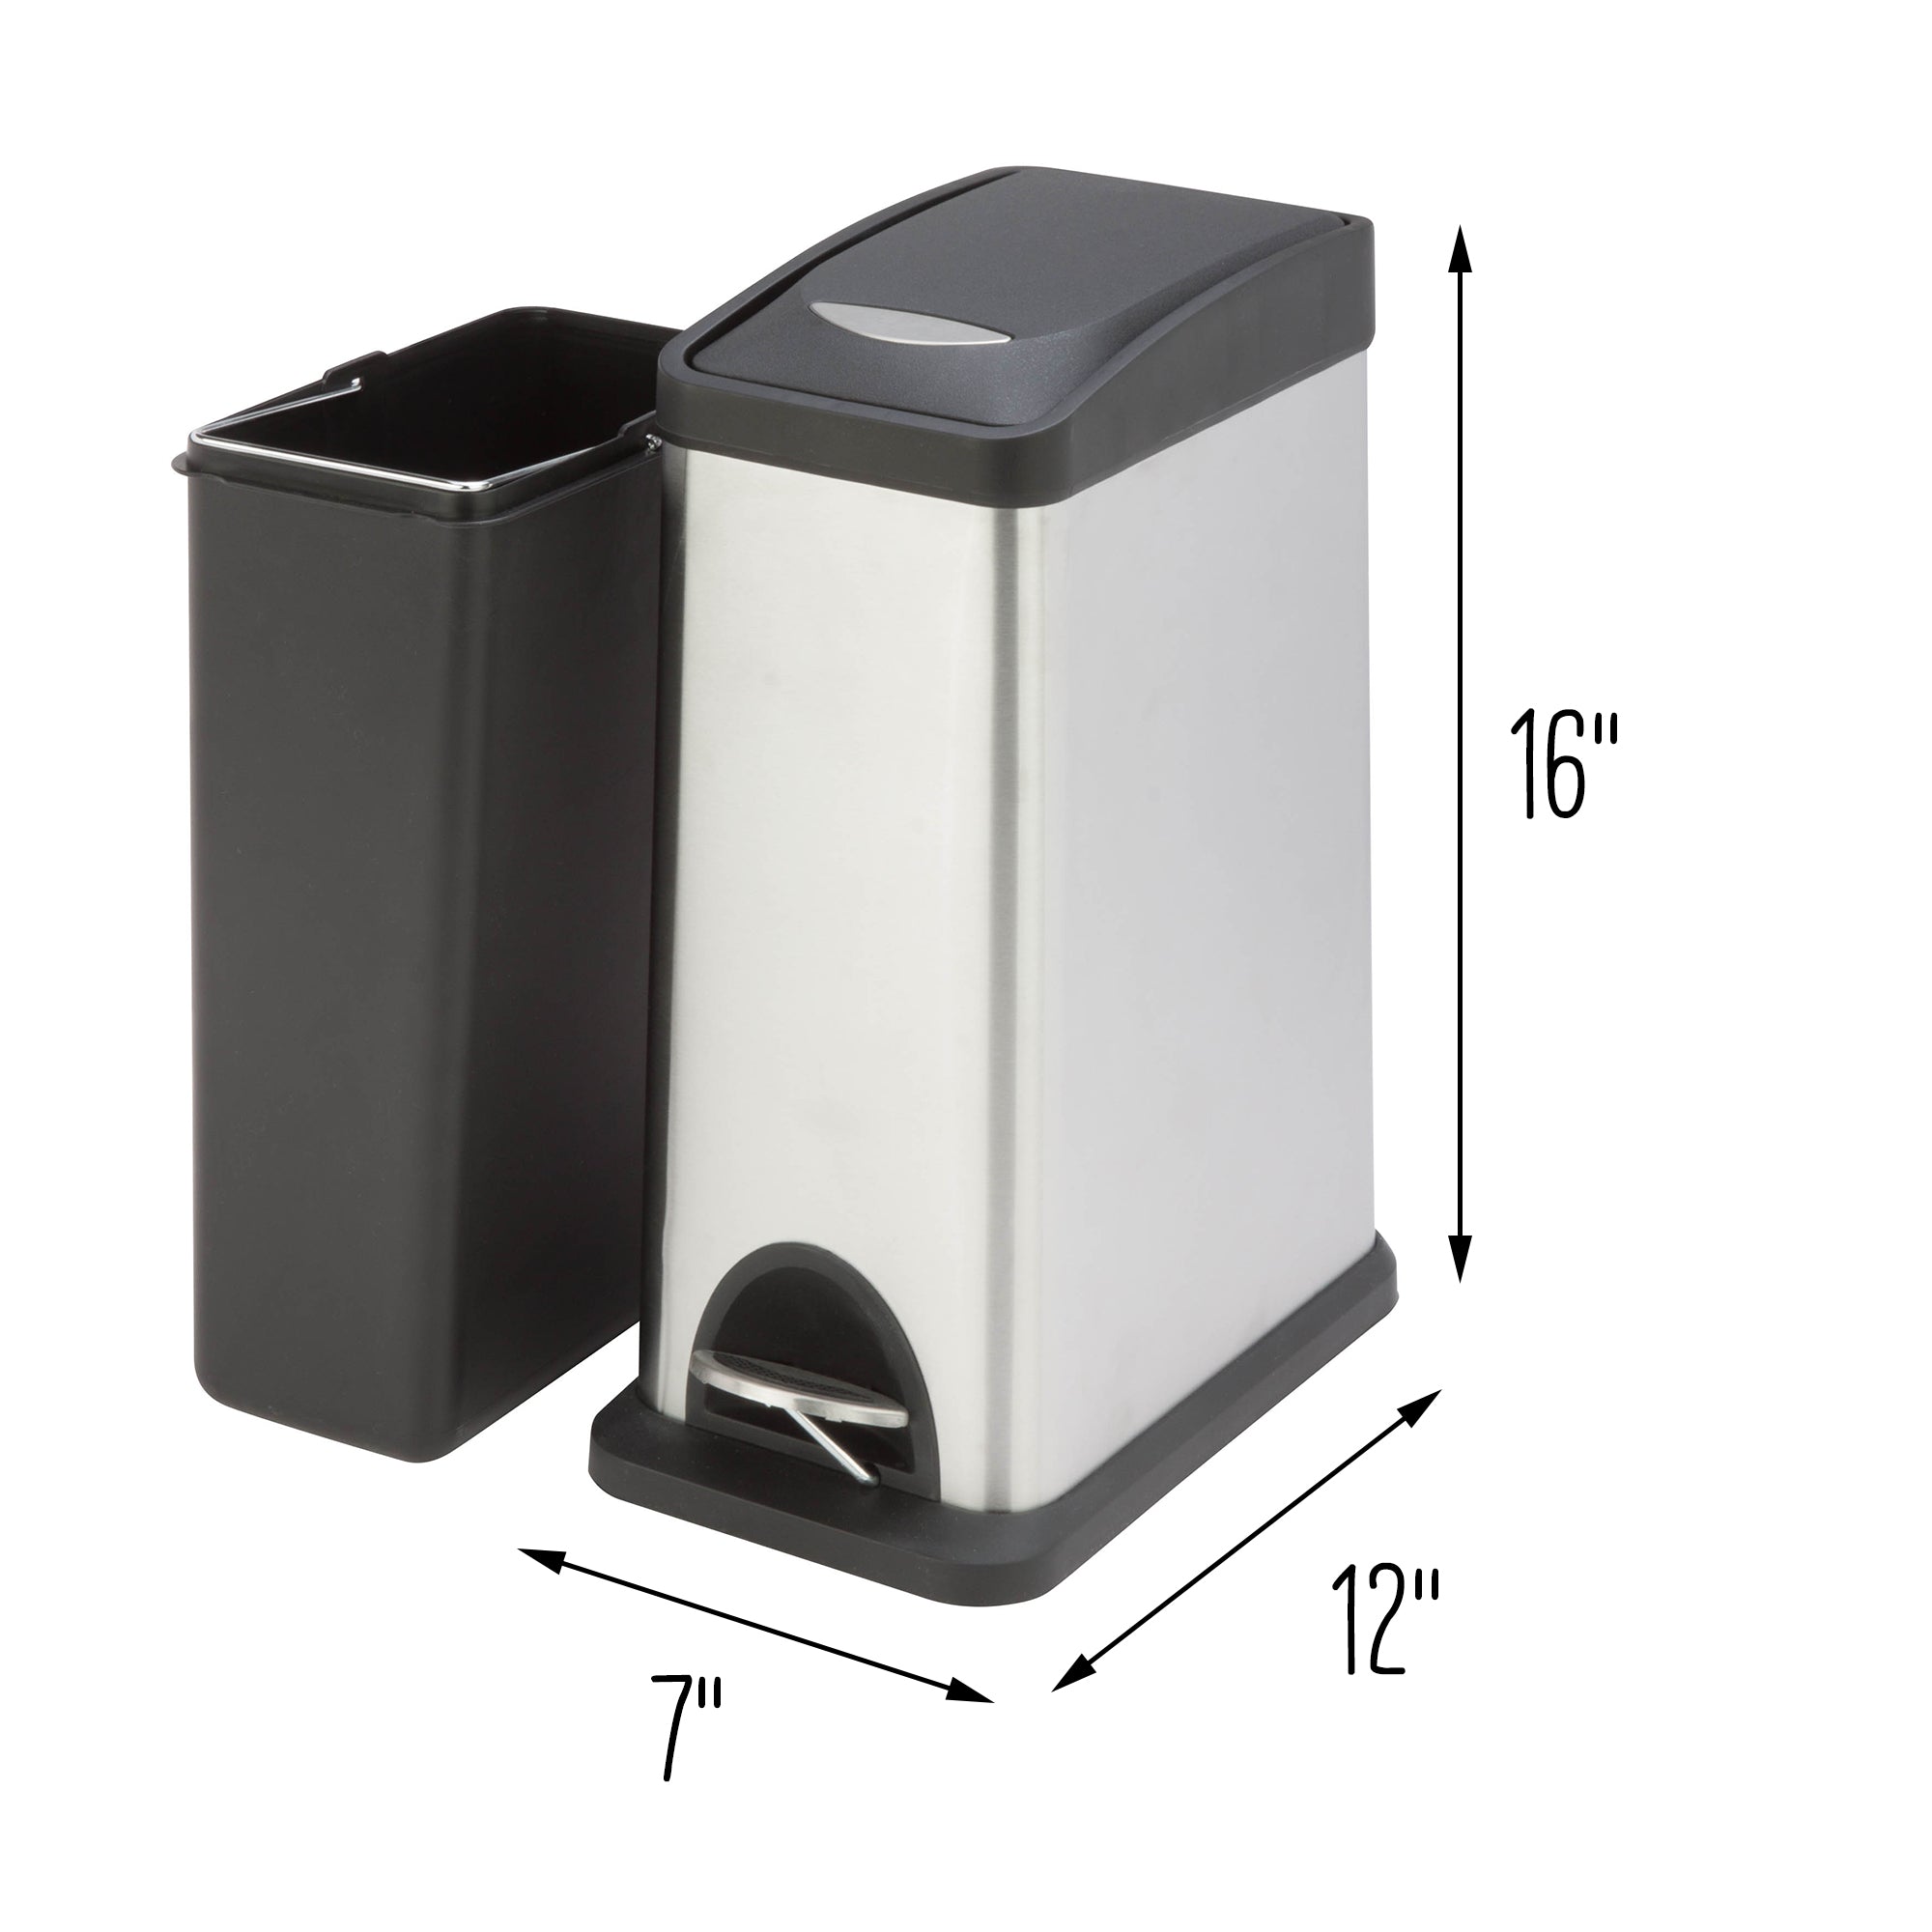 Honey-Can-Do 50L Large Stainless Steel Step Trash Can 